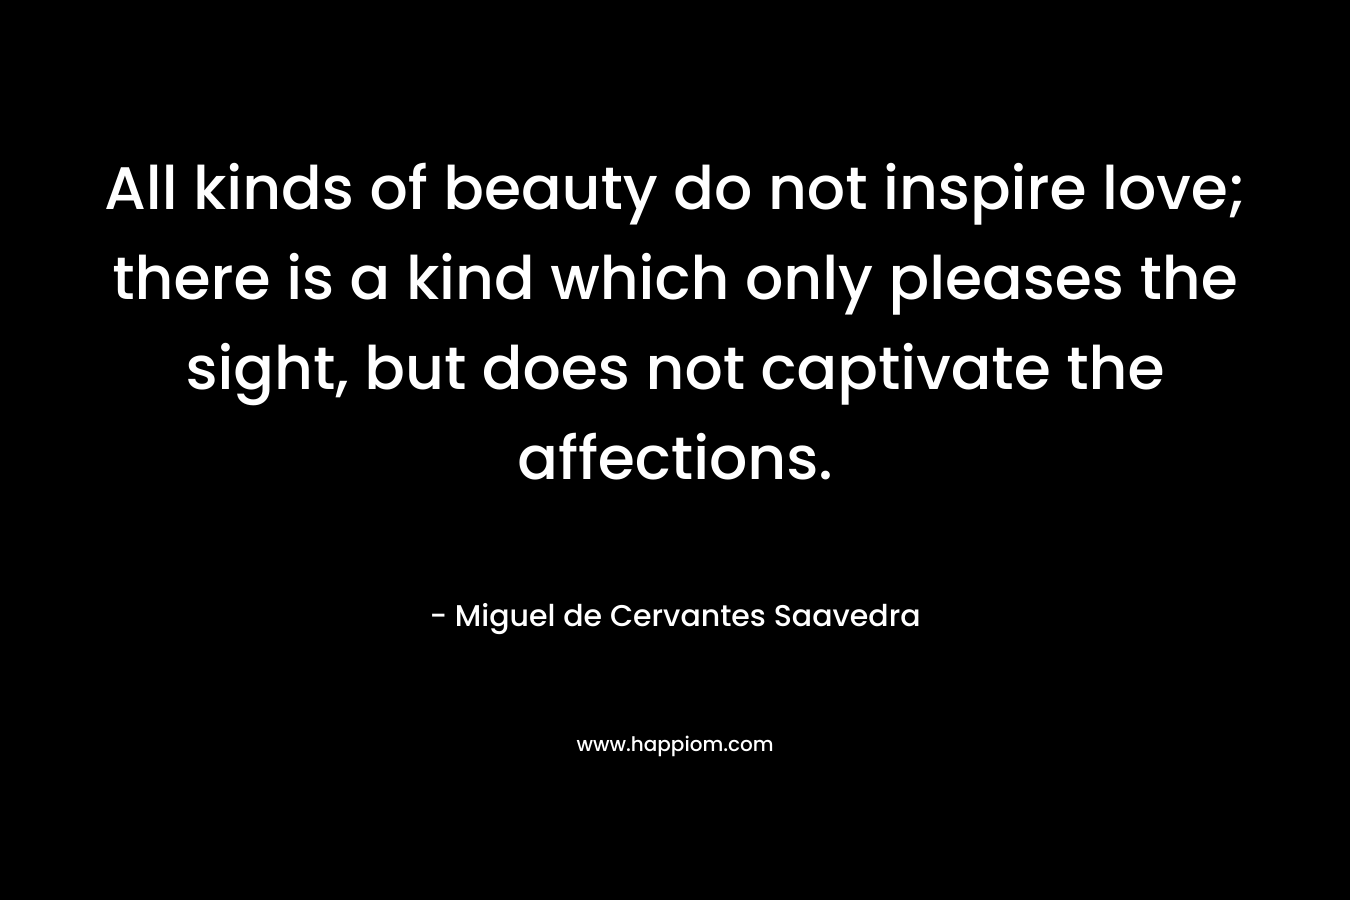 All kinds of beauty do not inspire love; there is a kind which only pleases the sight, but does not captivate the affections.